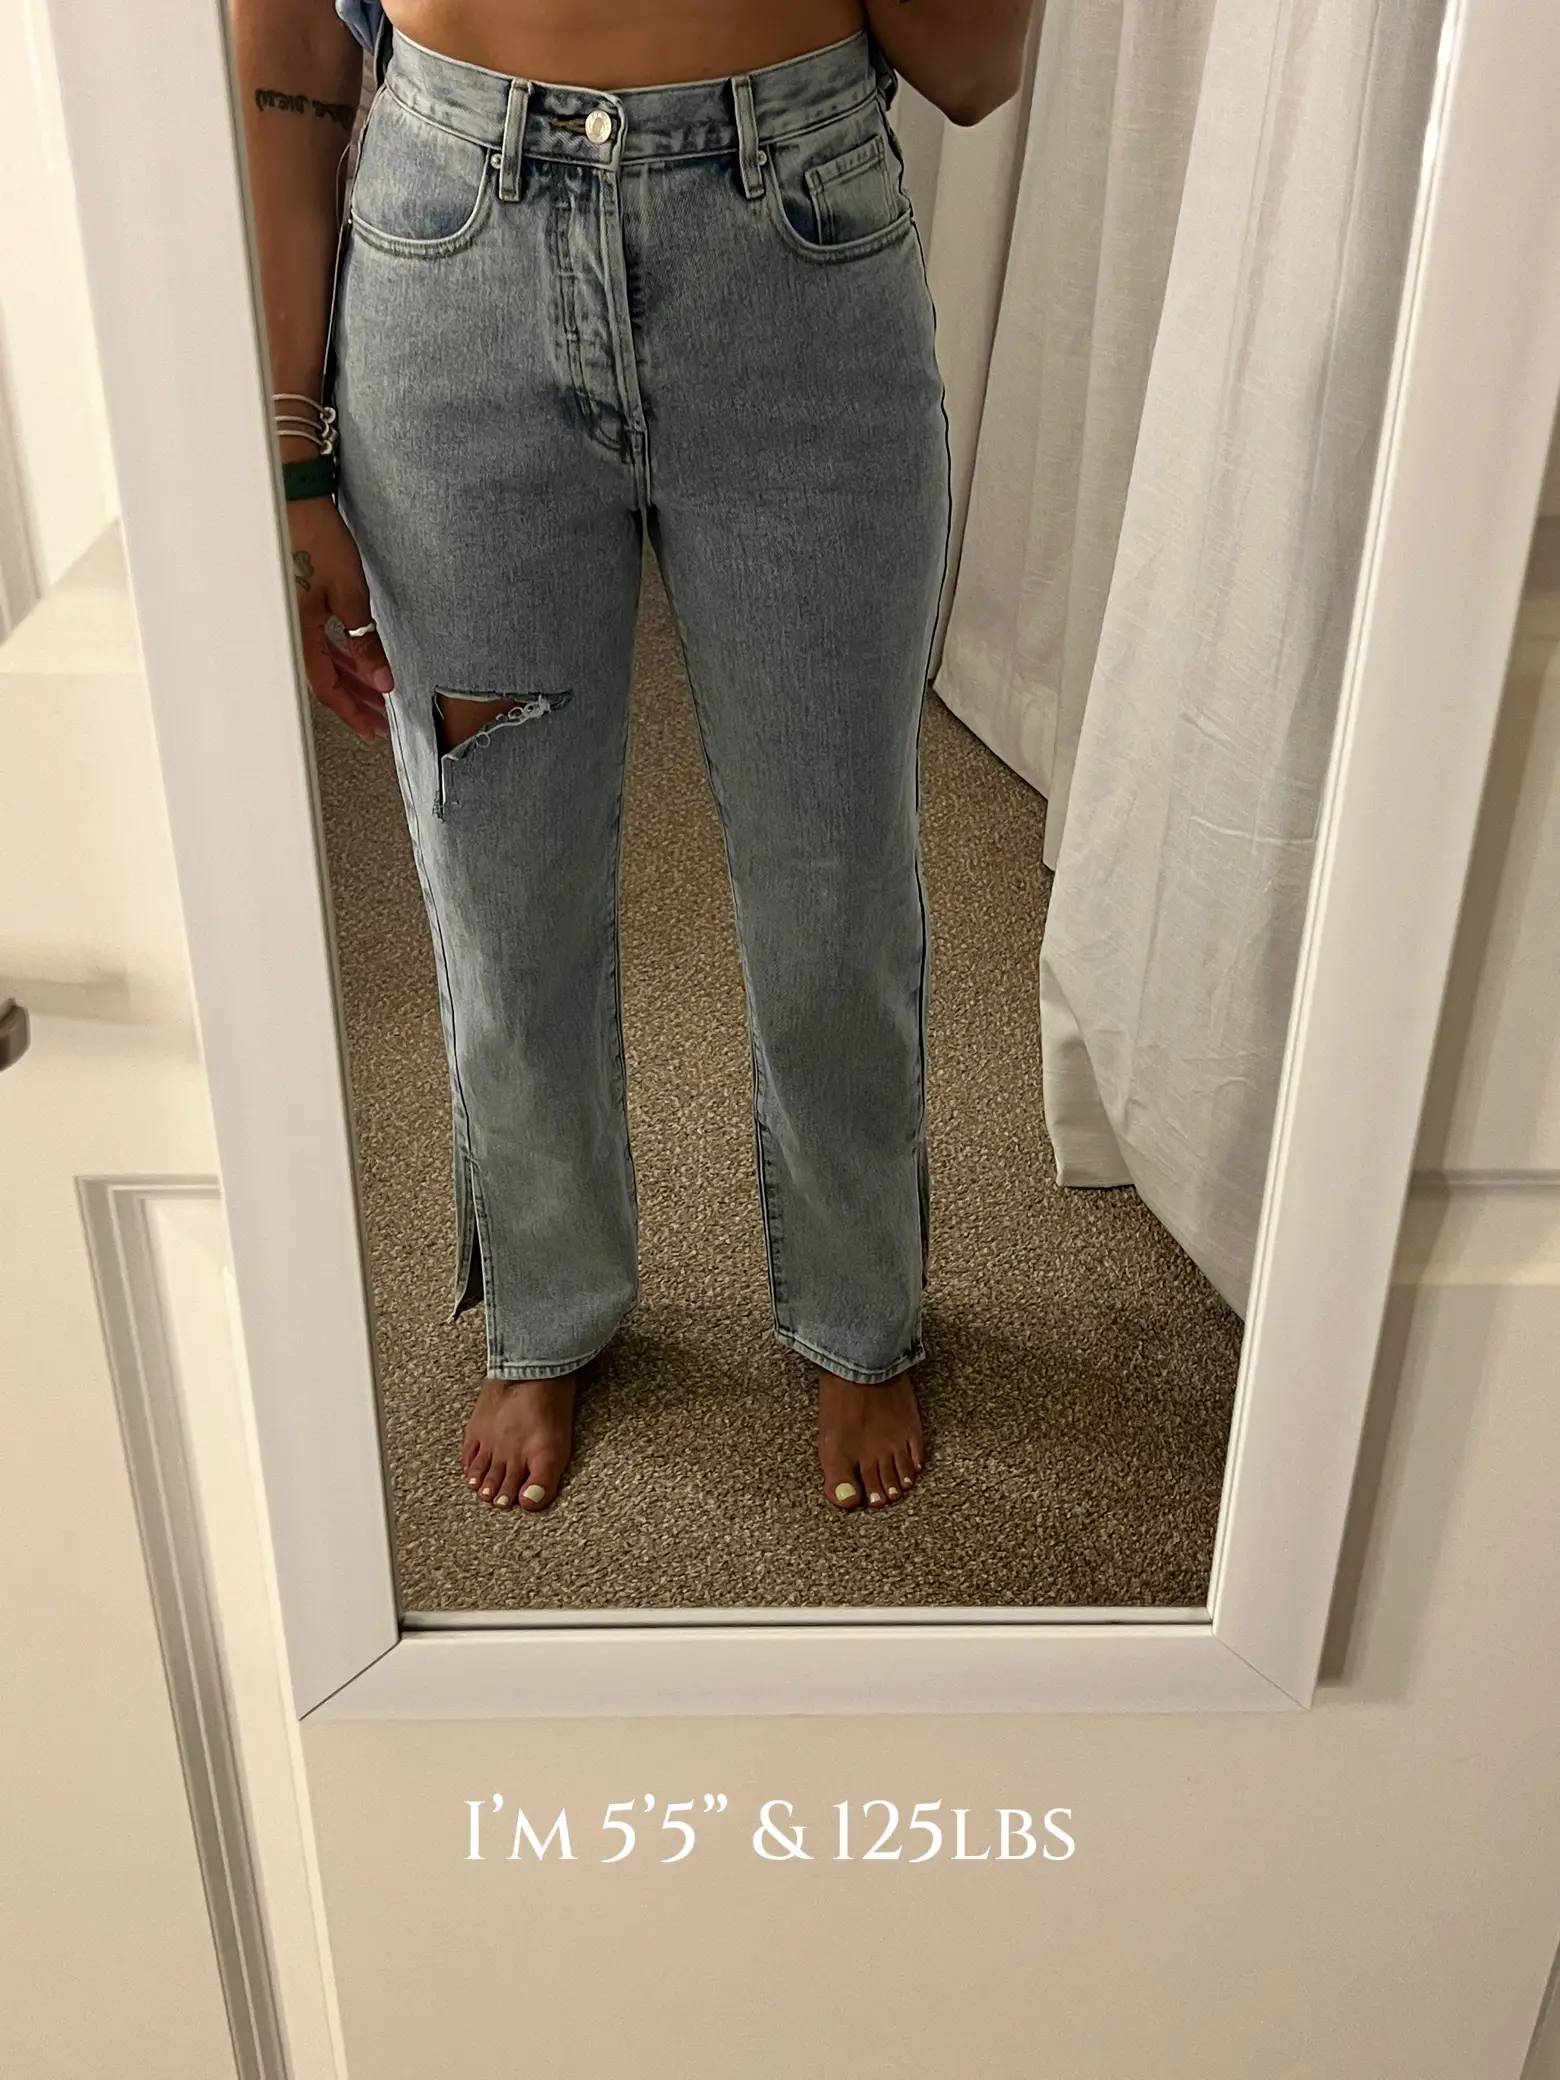 PACSUN Jeans Try on Haul, Gallery posted by MaineyMurchison